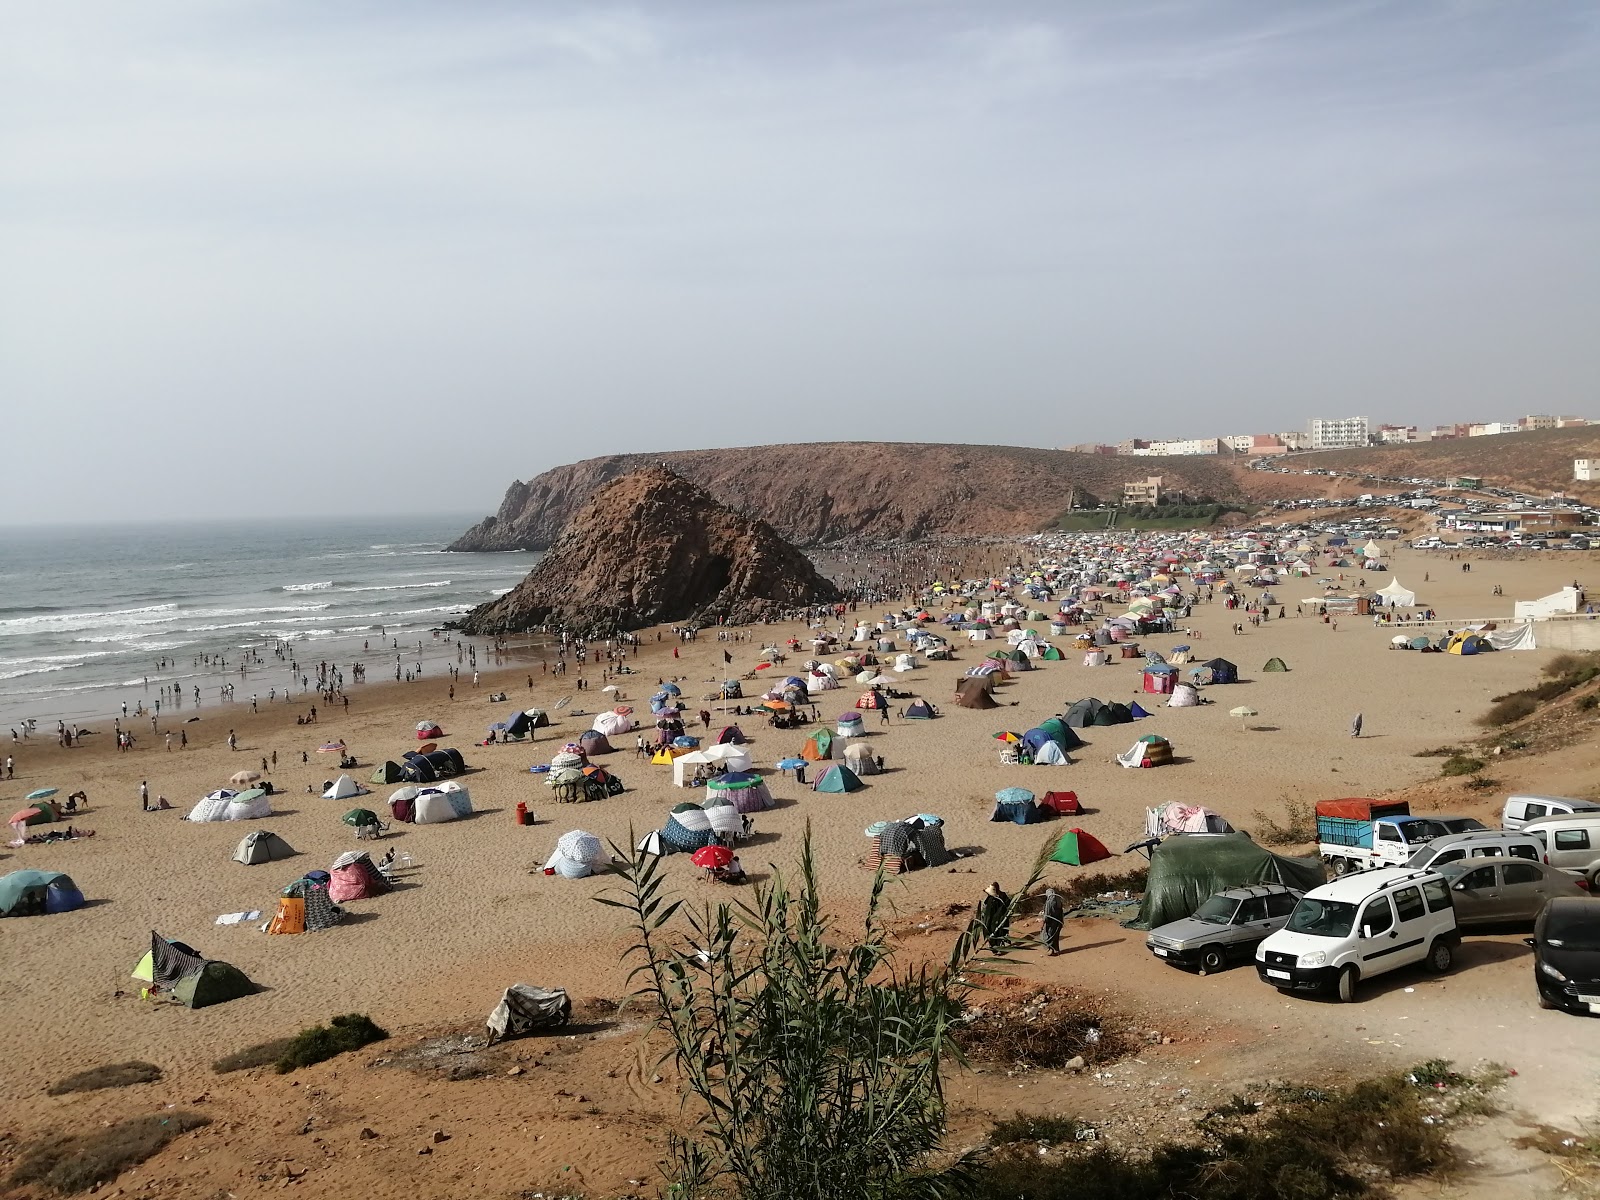 Photo of Plage Sidi Mohammed Ben Abdellah - popular place among relax connoisseurs